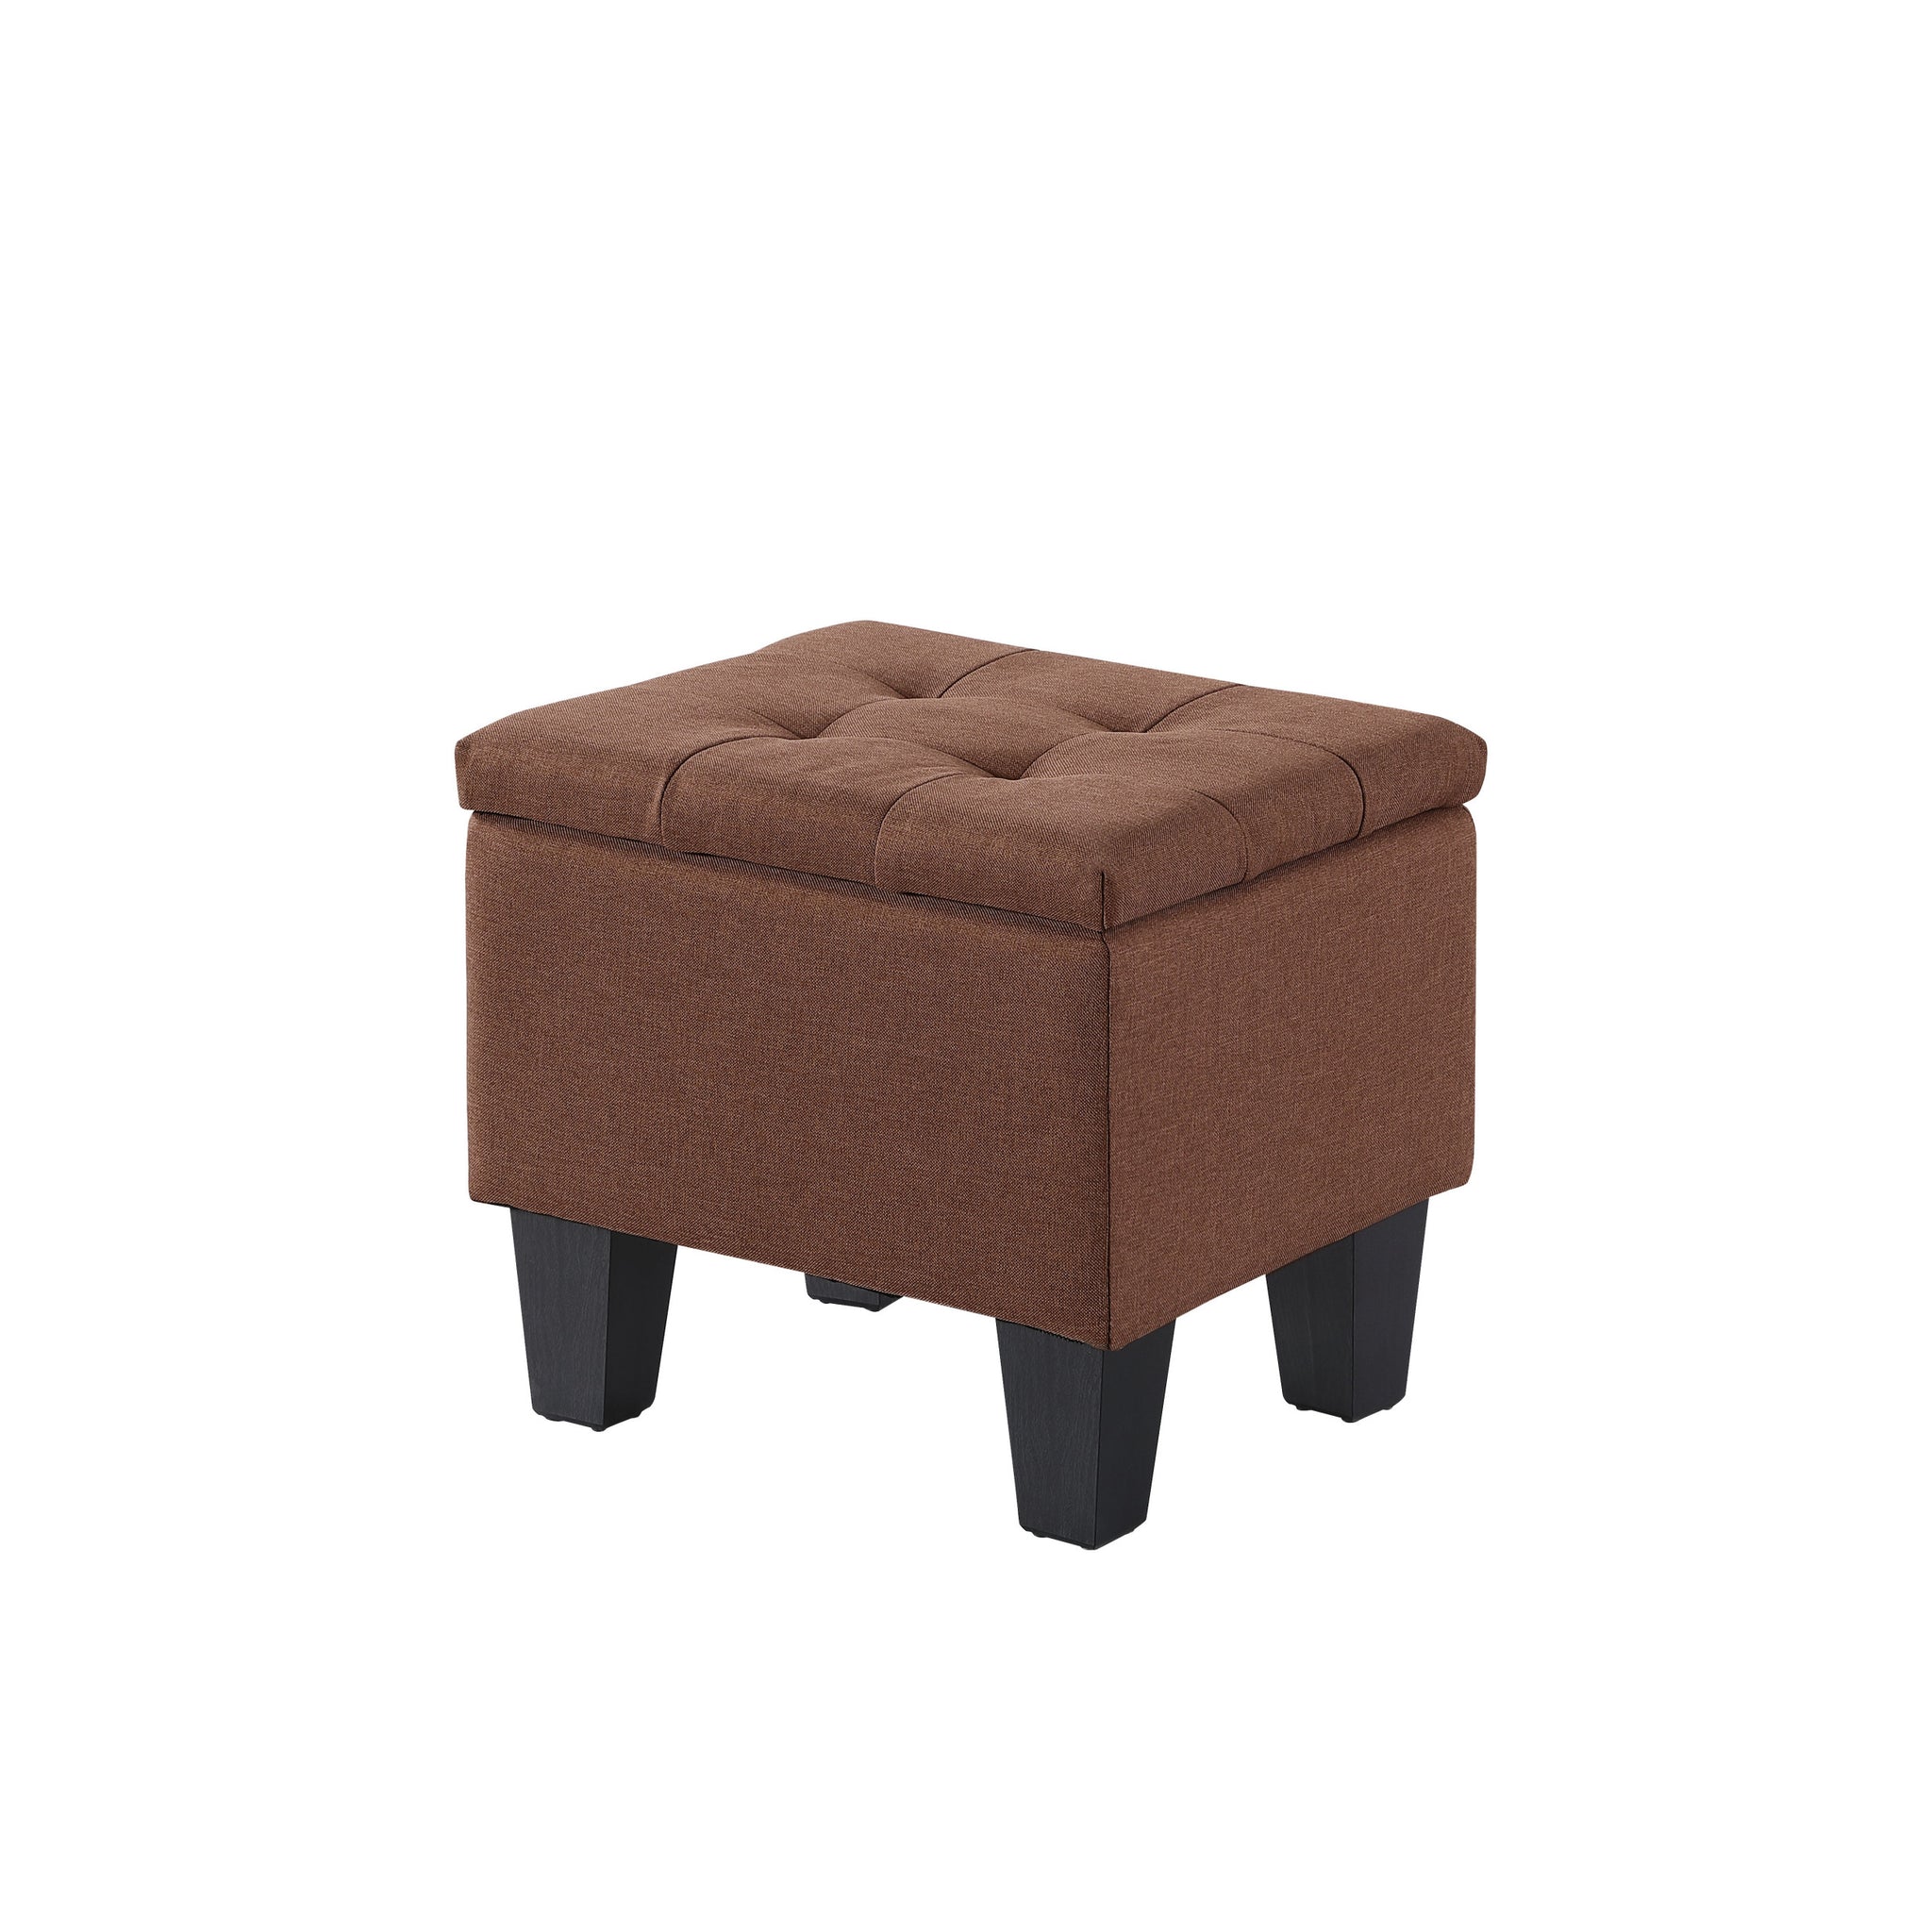 VIDEO Large Storage Ottoman Bench Set, 3 in 1 brown-fabric